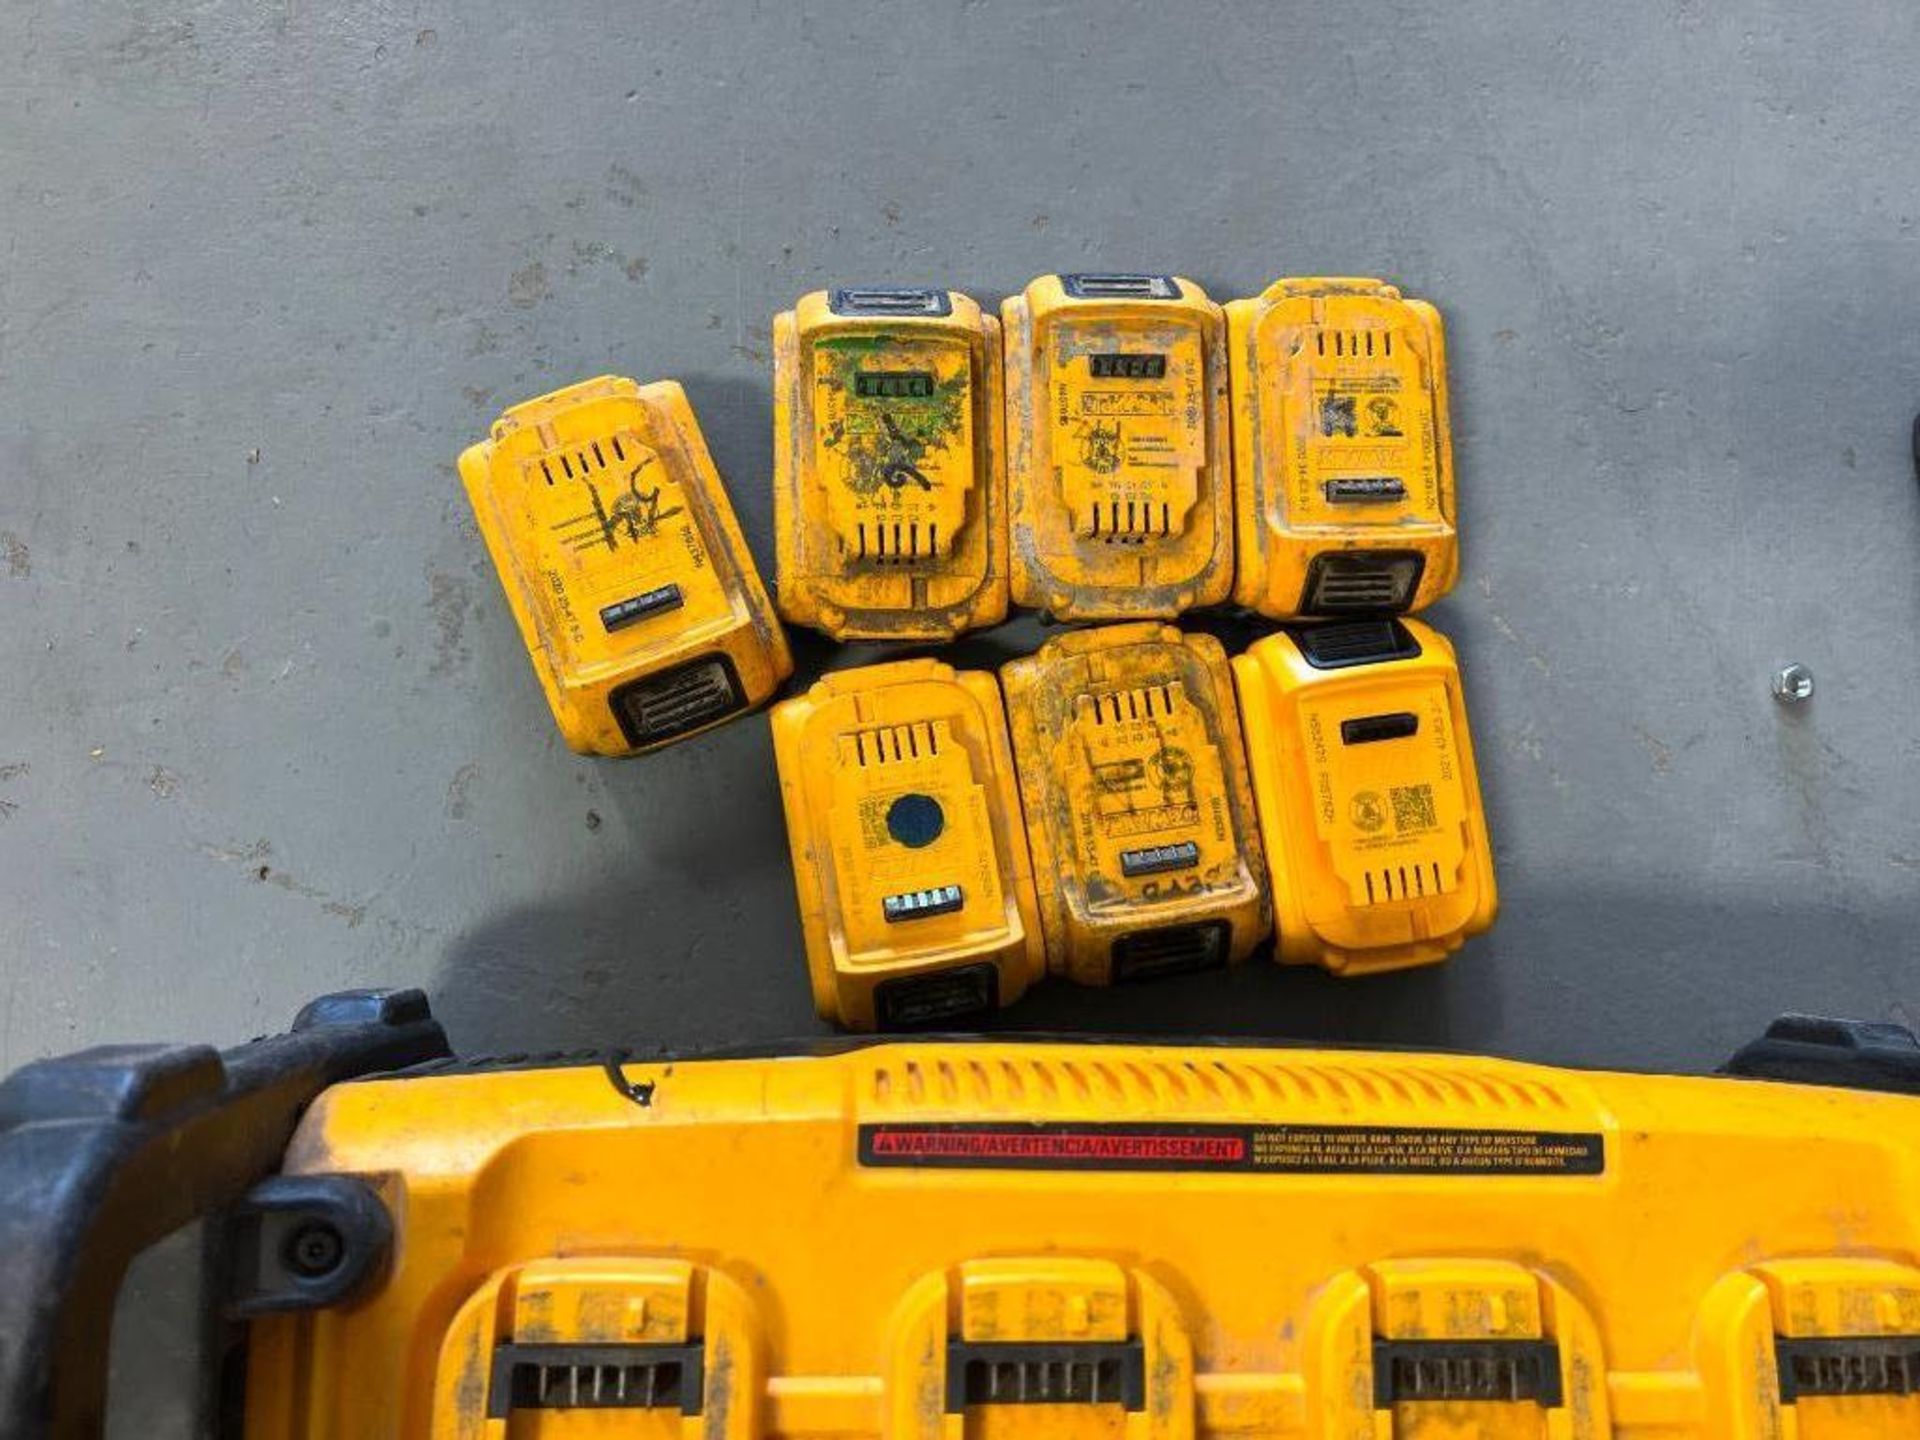 DeWalt Portable Power Station & Batteries. Located in Mt. Pleasant, IA - Image 2 of 2